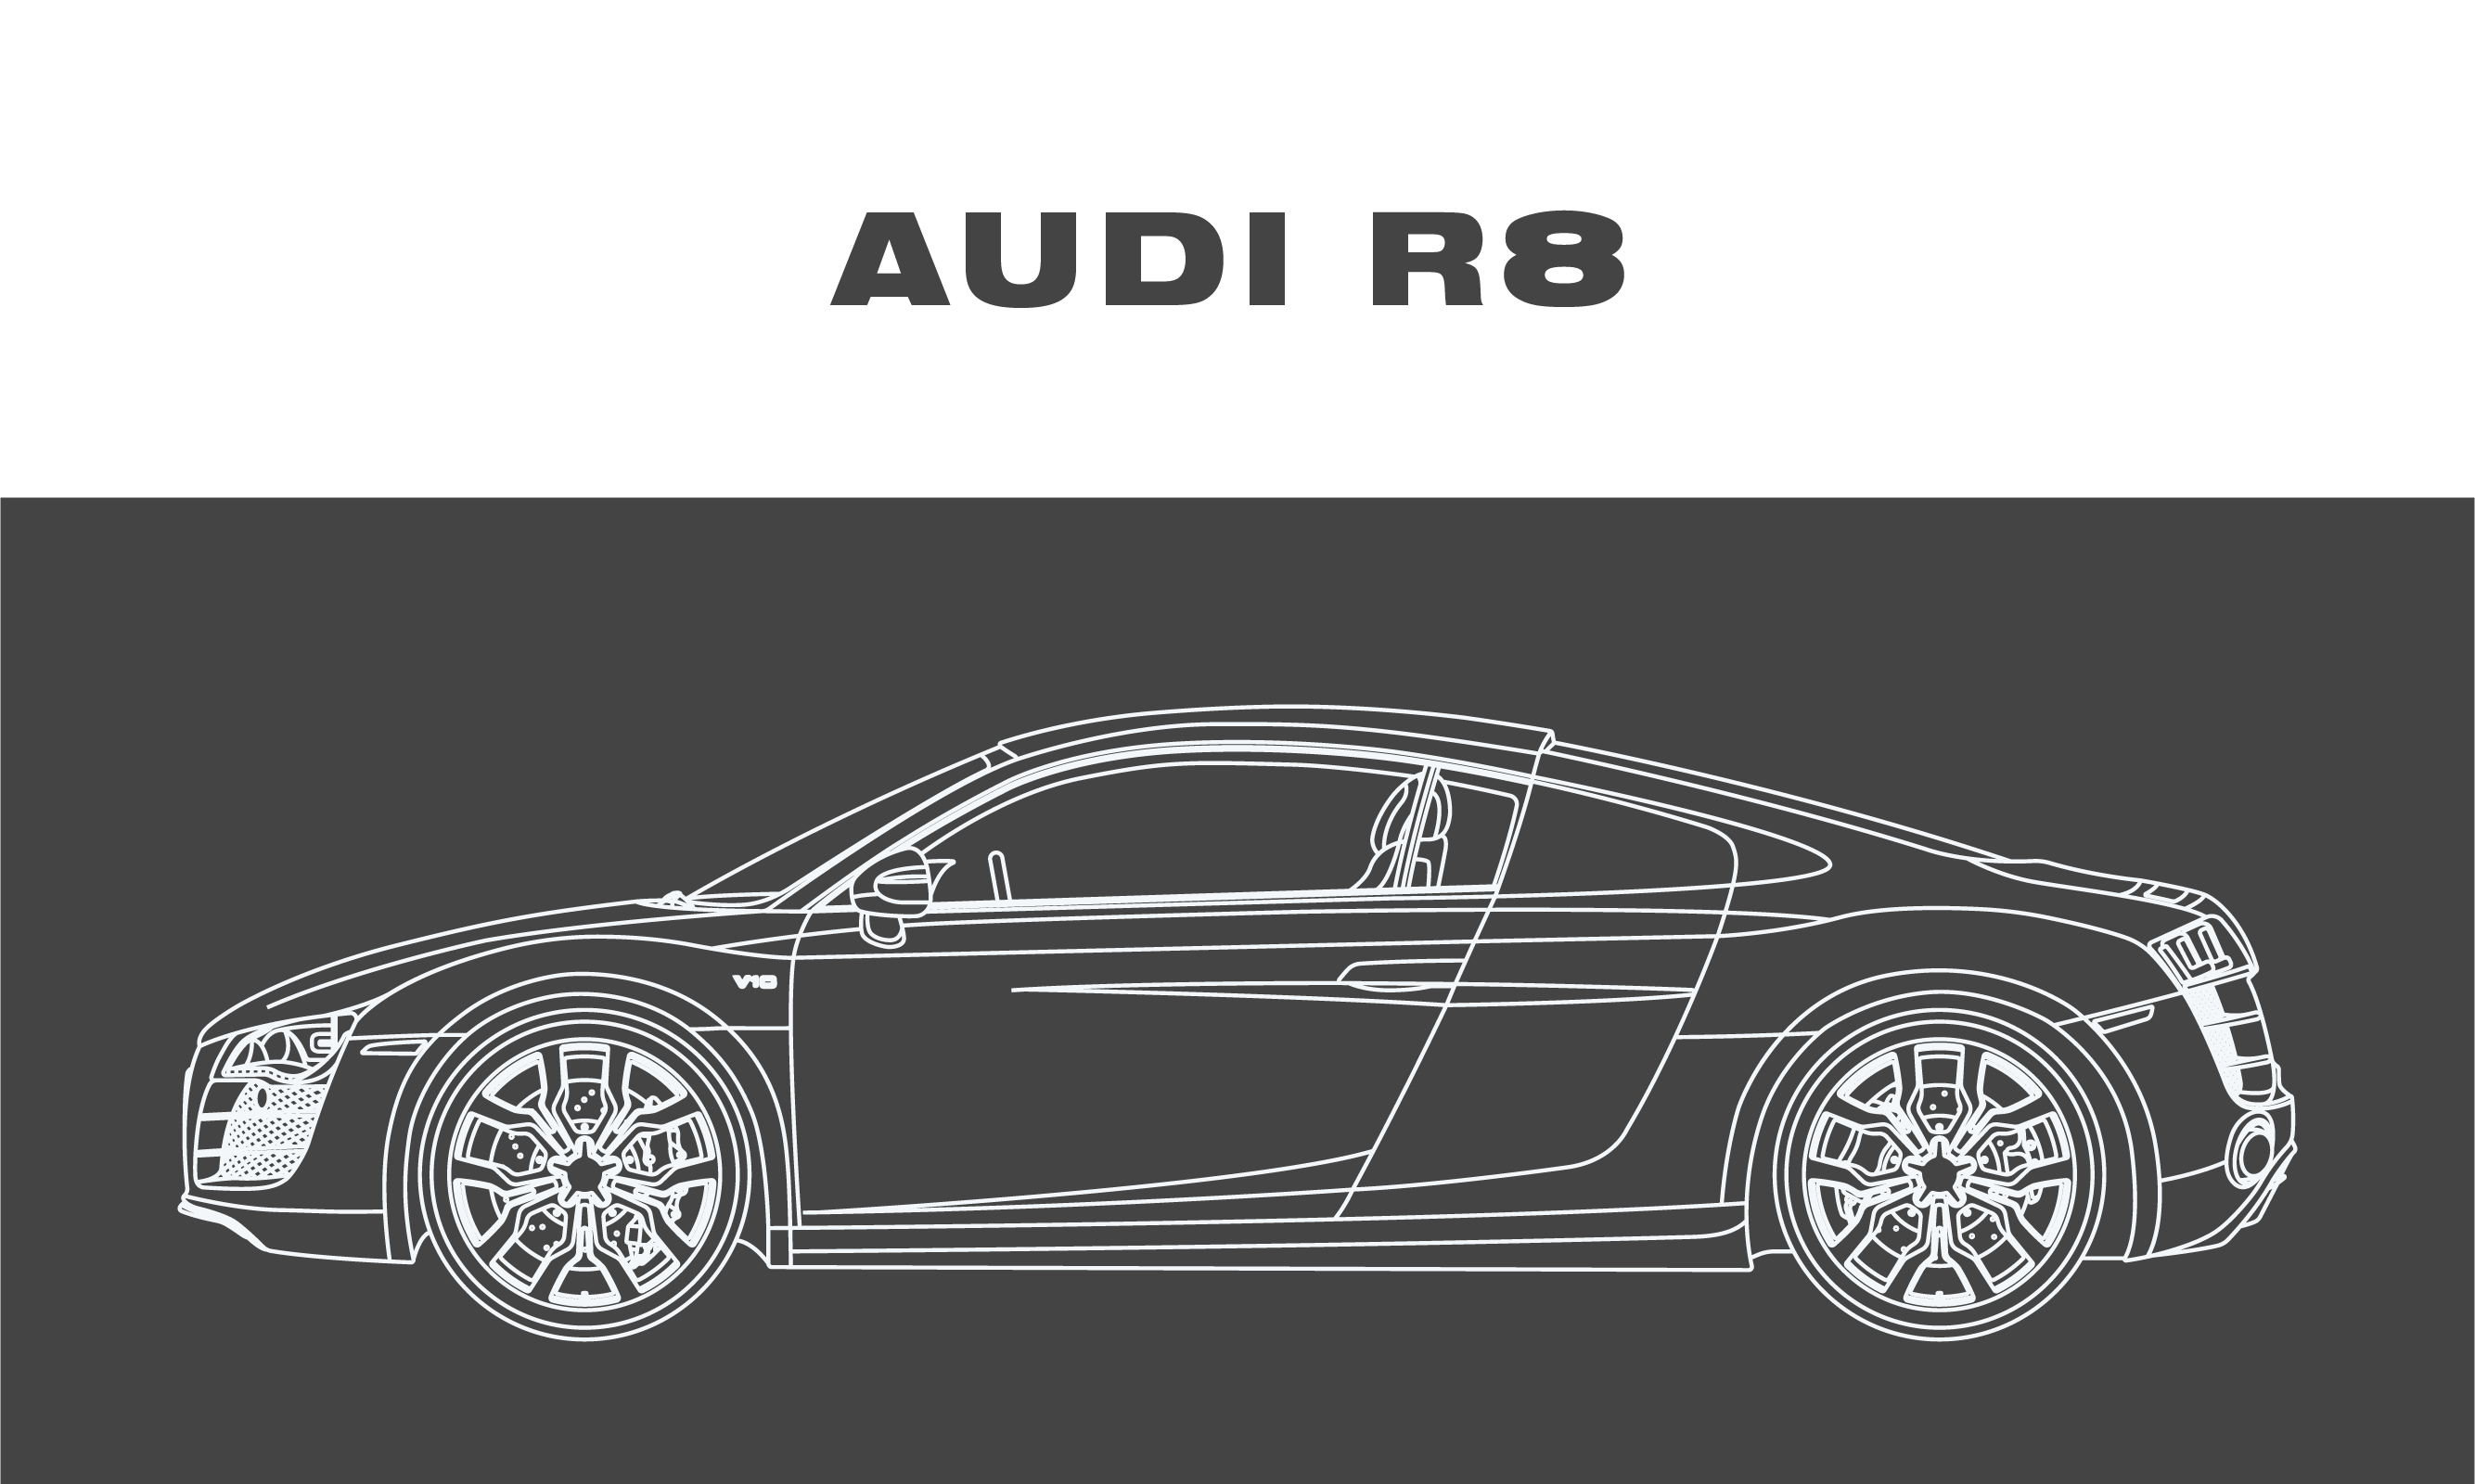 The Rarity of the Manual Transmission Audi R8: An Analysis